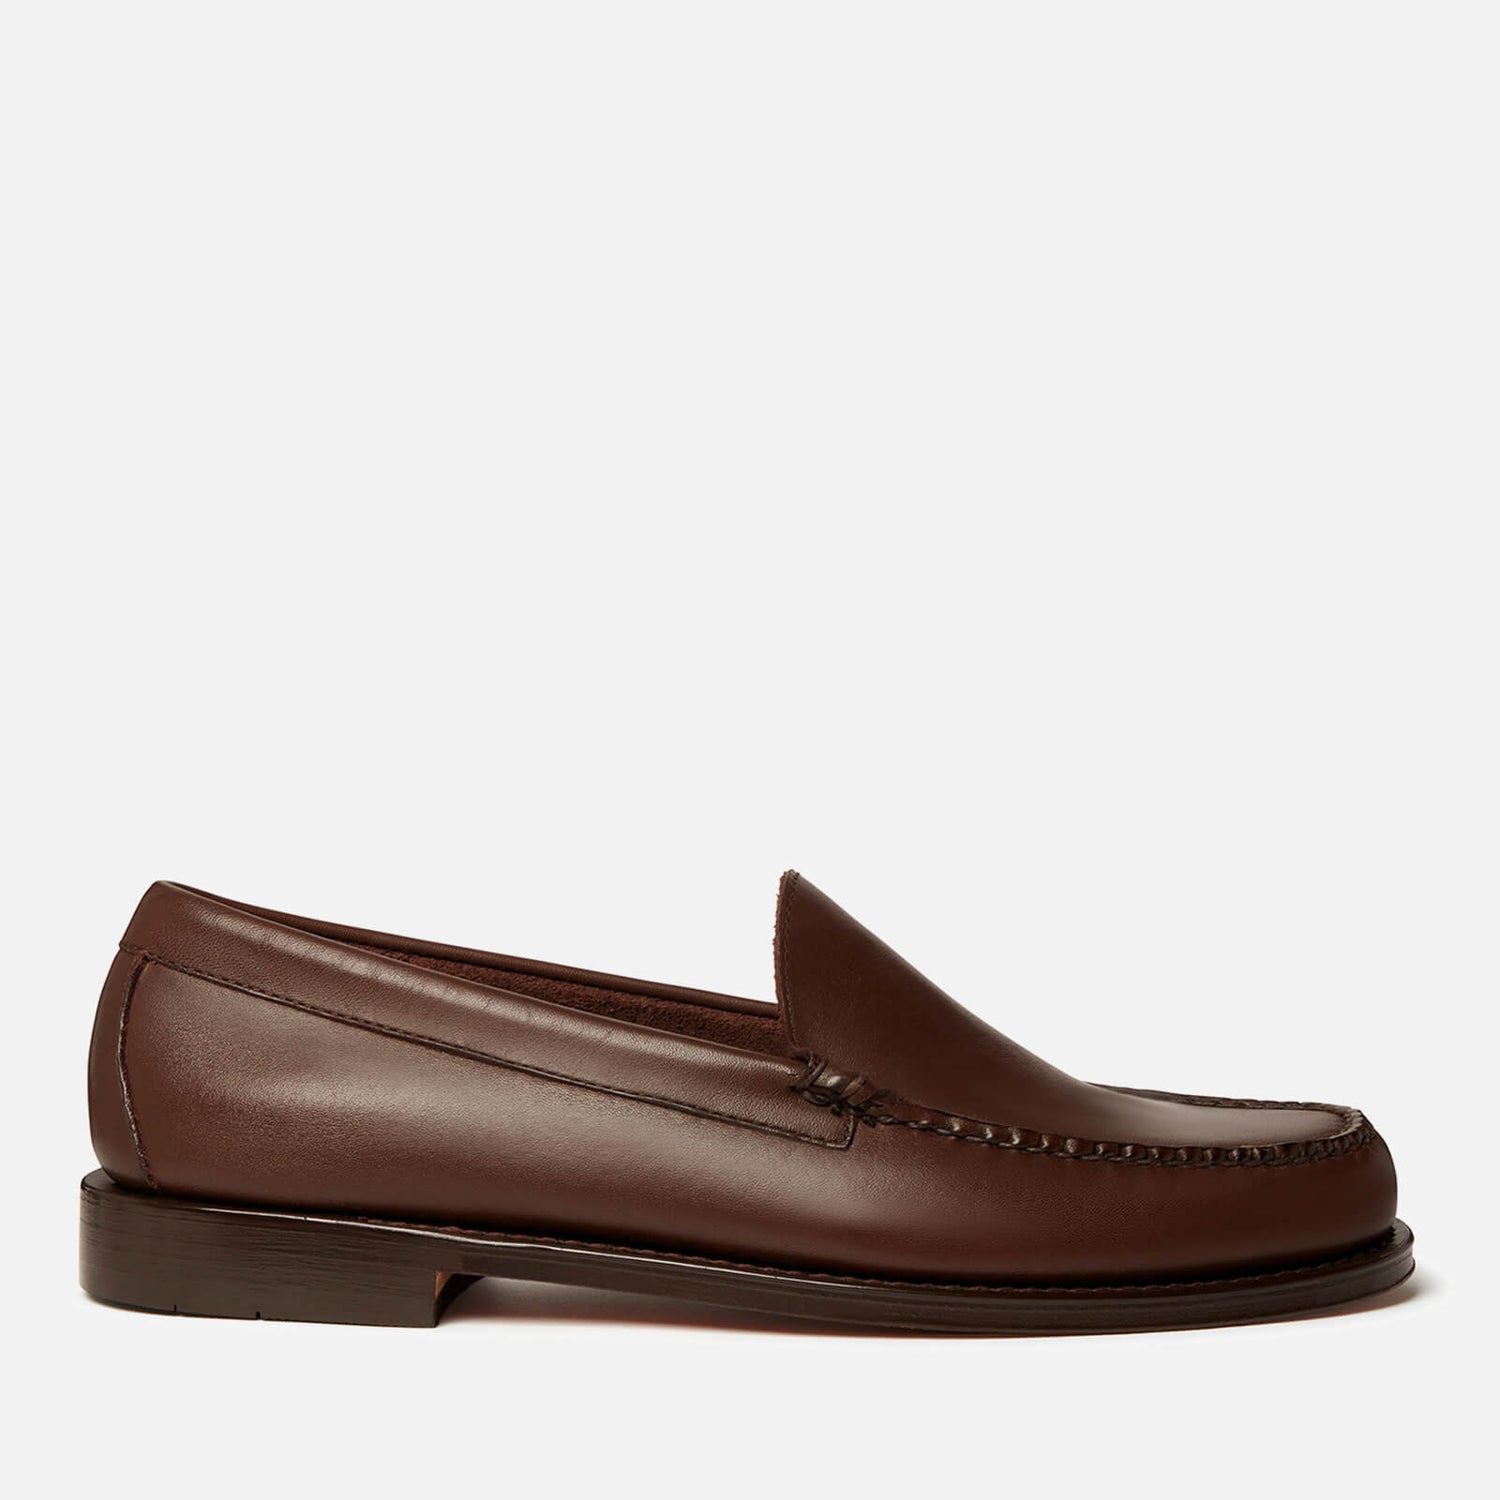 G.H Bass Men's Venetian Leather Loafers - UK 9